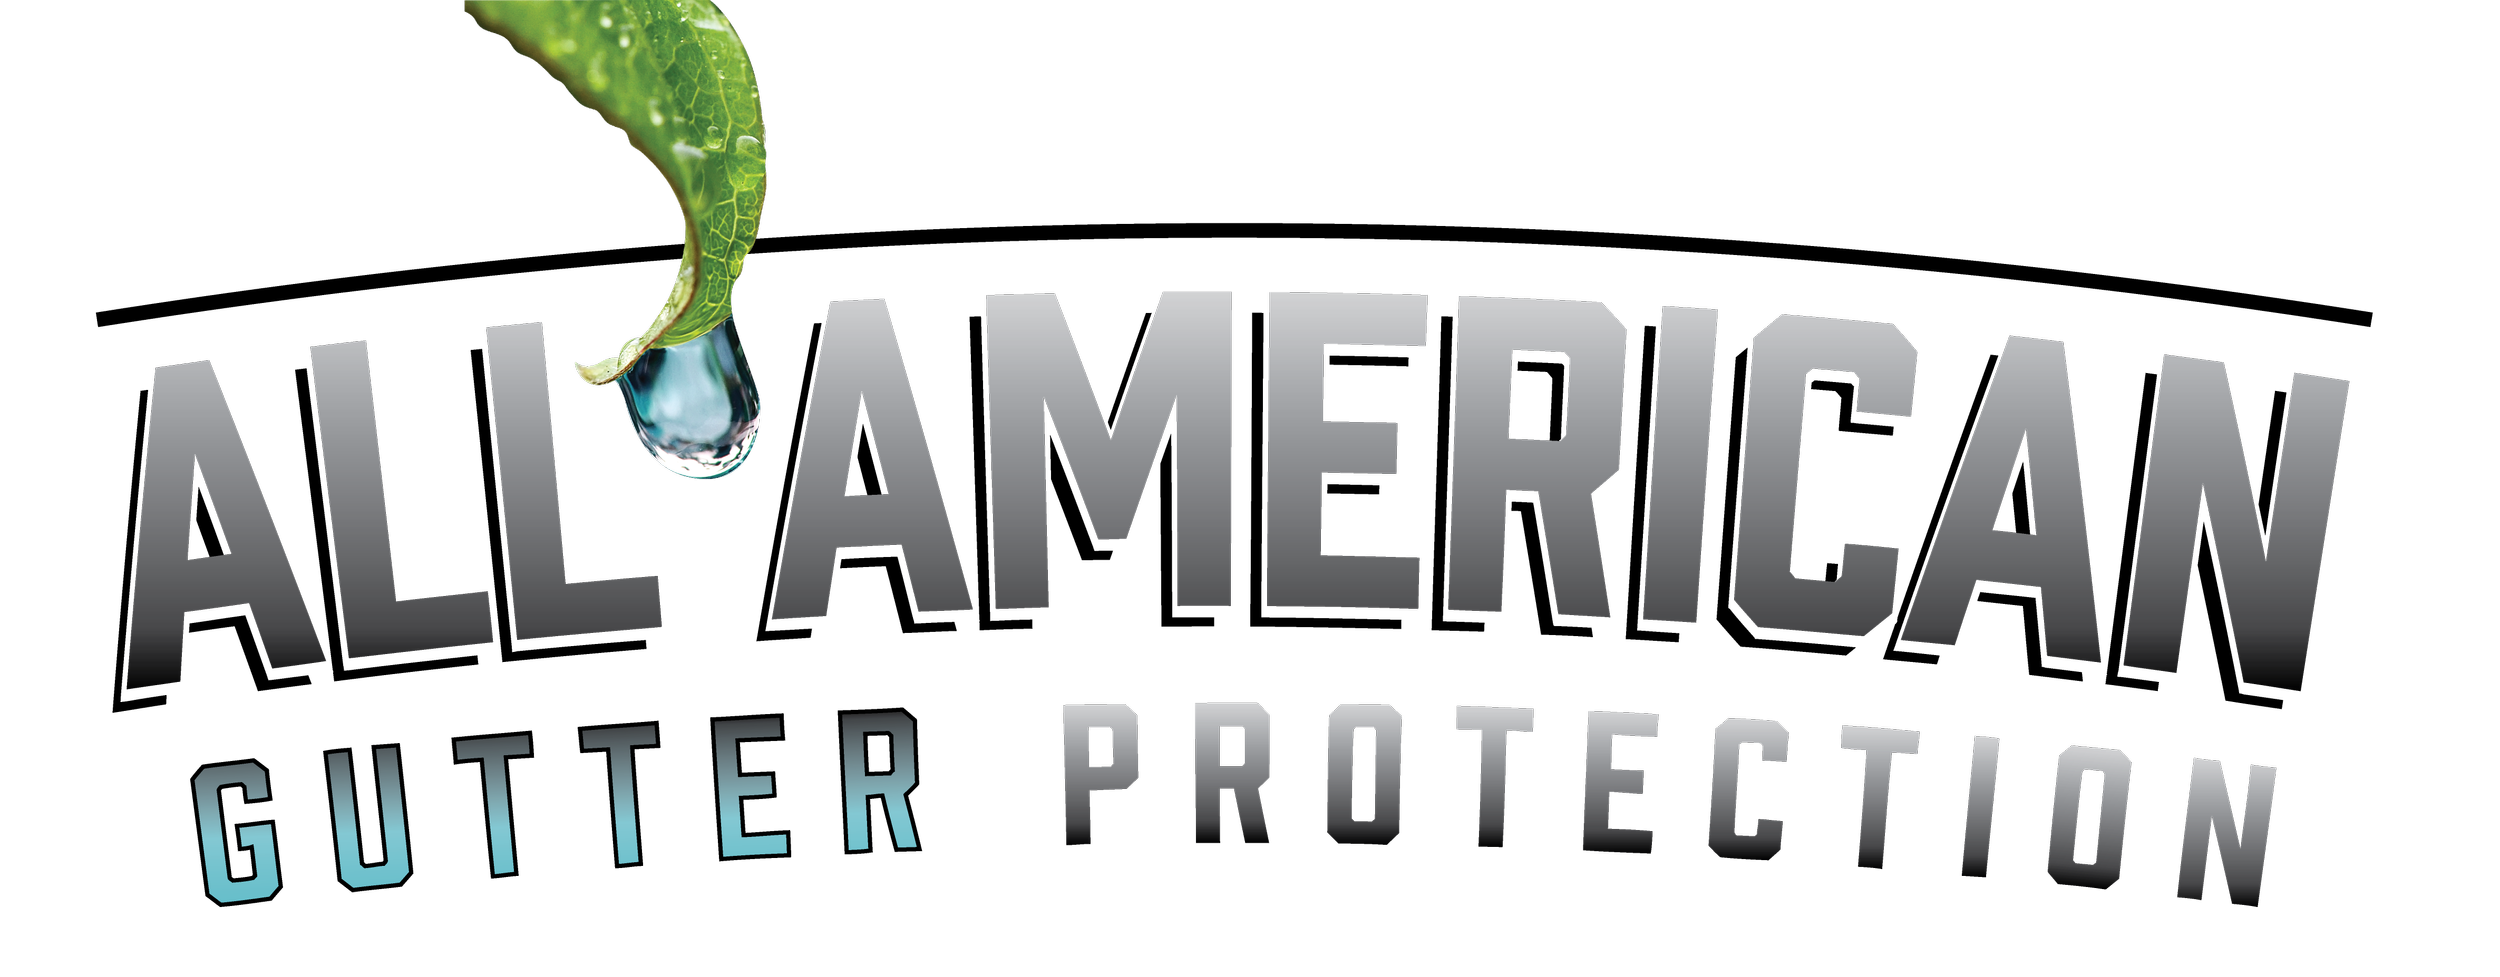 all american gutter protection.png